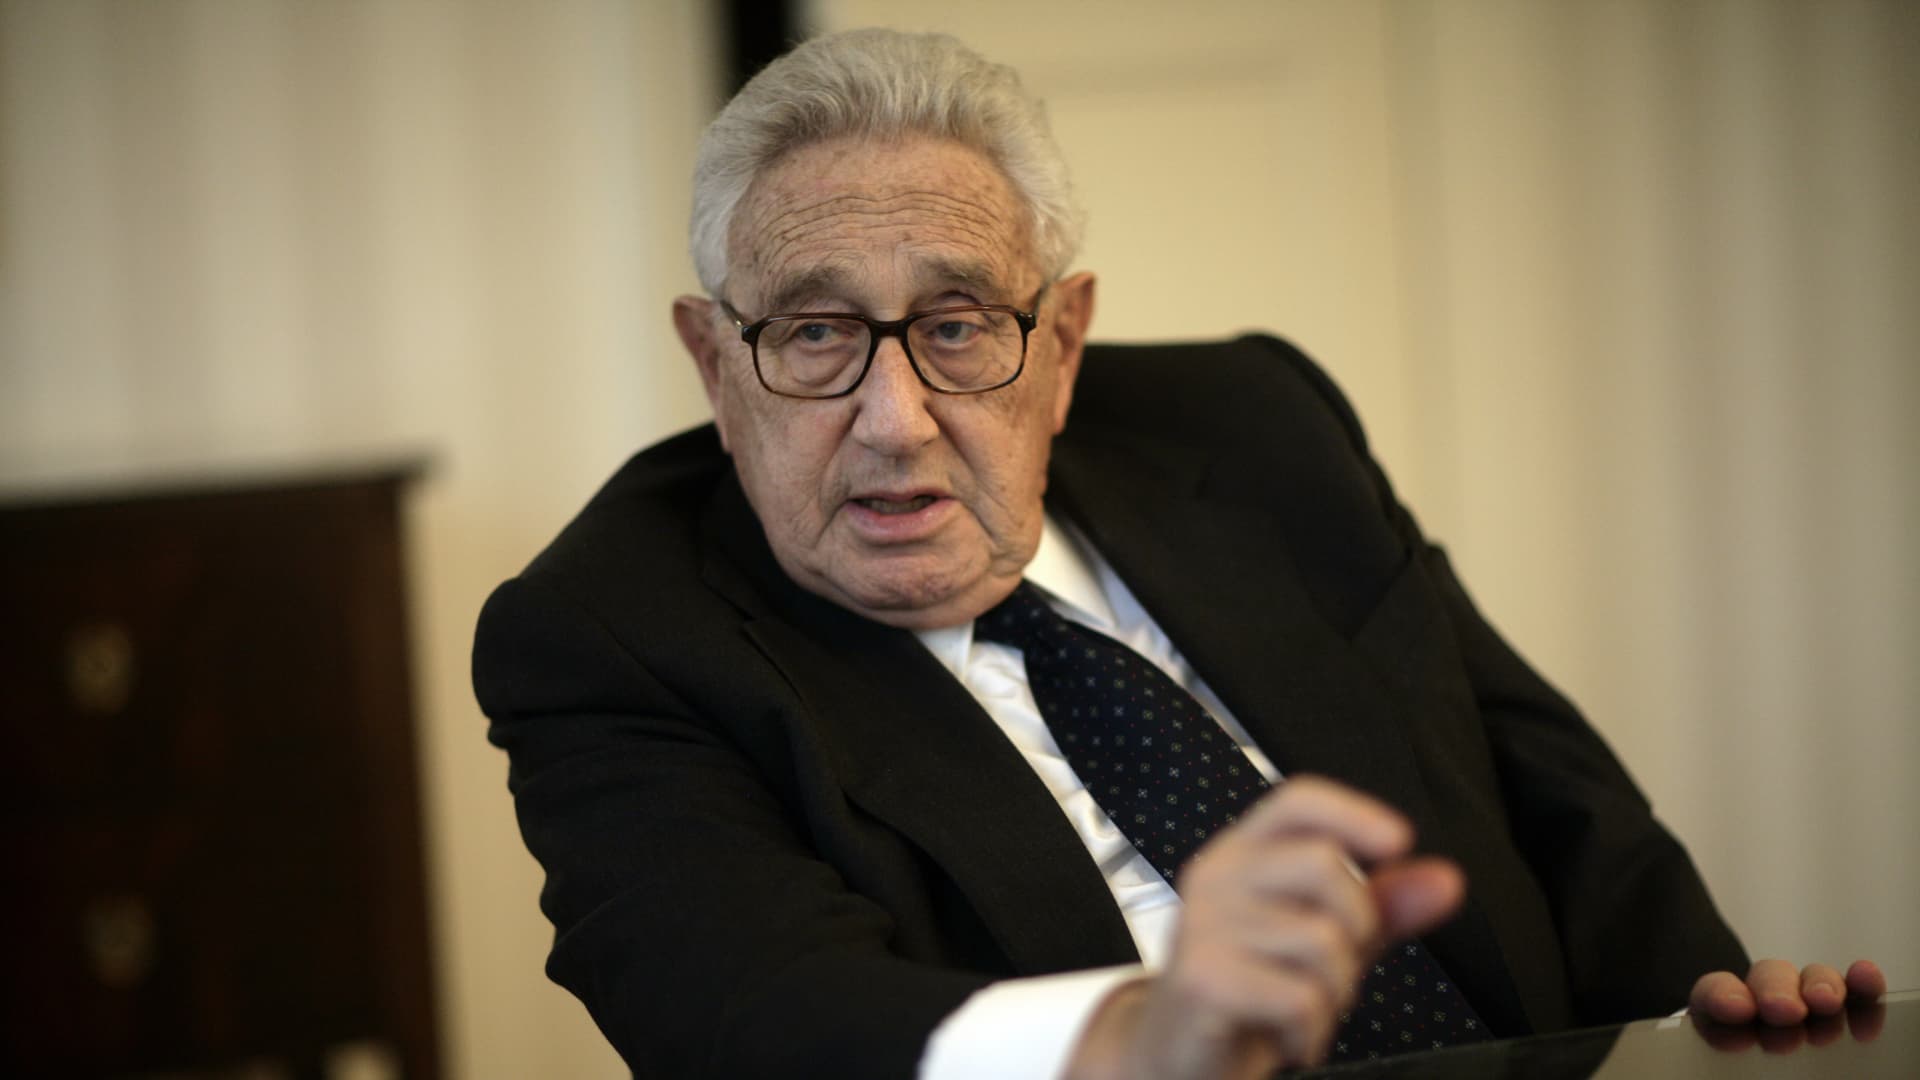 ‘Kissinger still lives in the 20th century’: Ukraine hits back at suggestion it should cede land to Russia